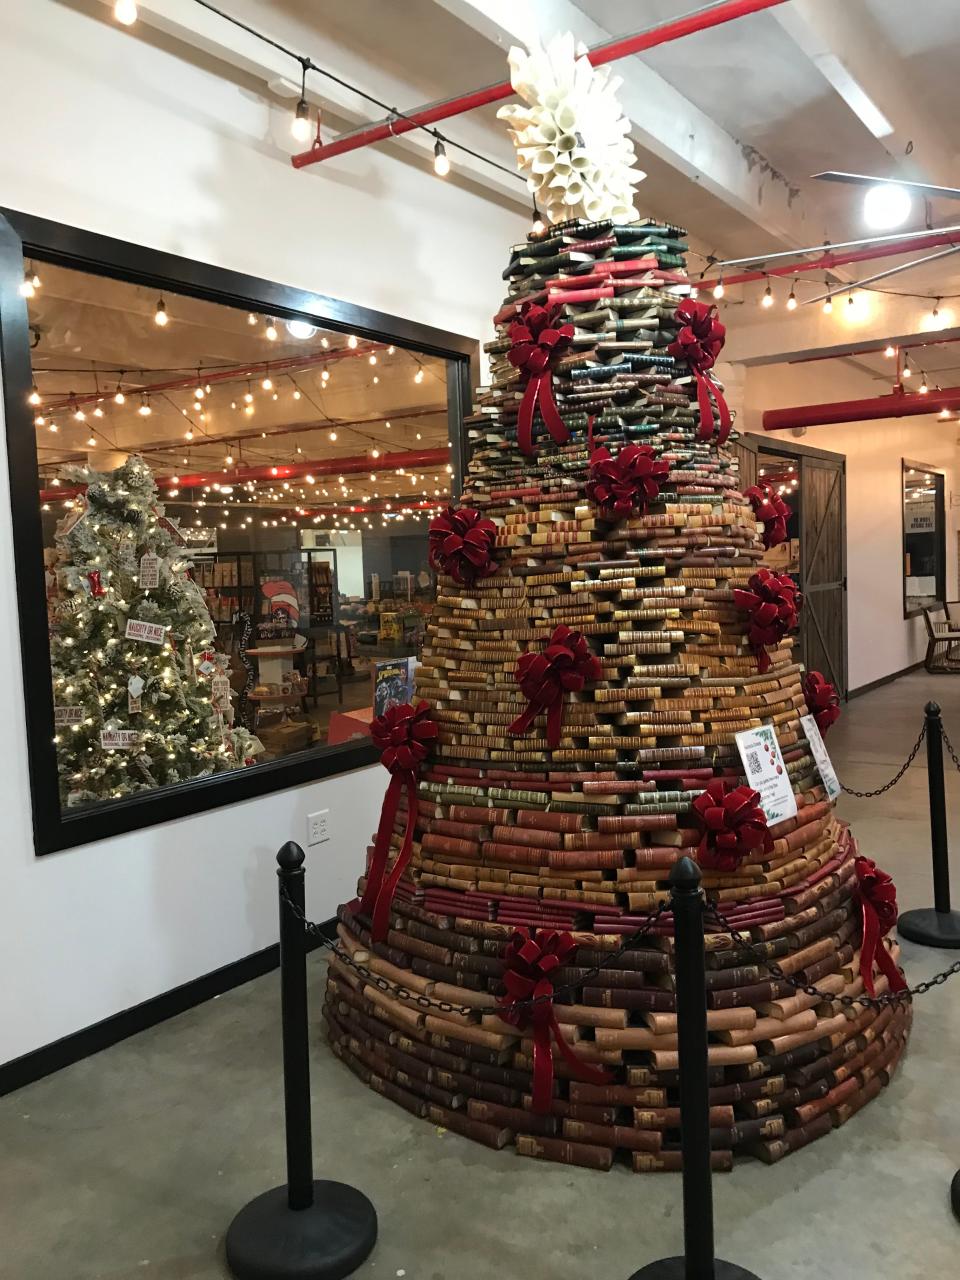 A book tree was erected at The Factory at Columbia, comprised of antique books. A $1,000 prize will be given to the person who can most accurately guess the number of books that make up the tree.